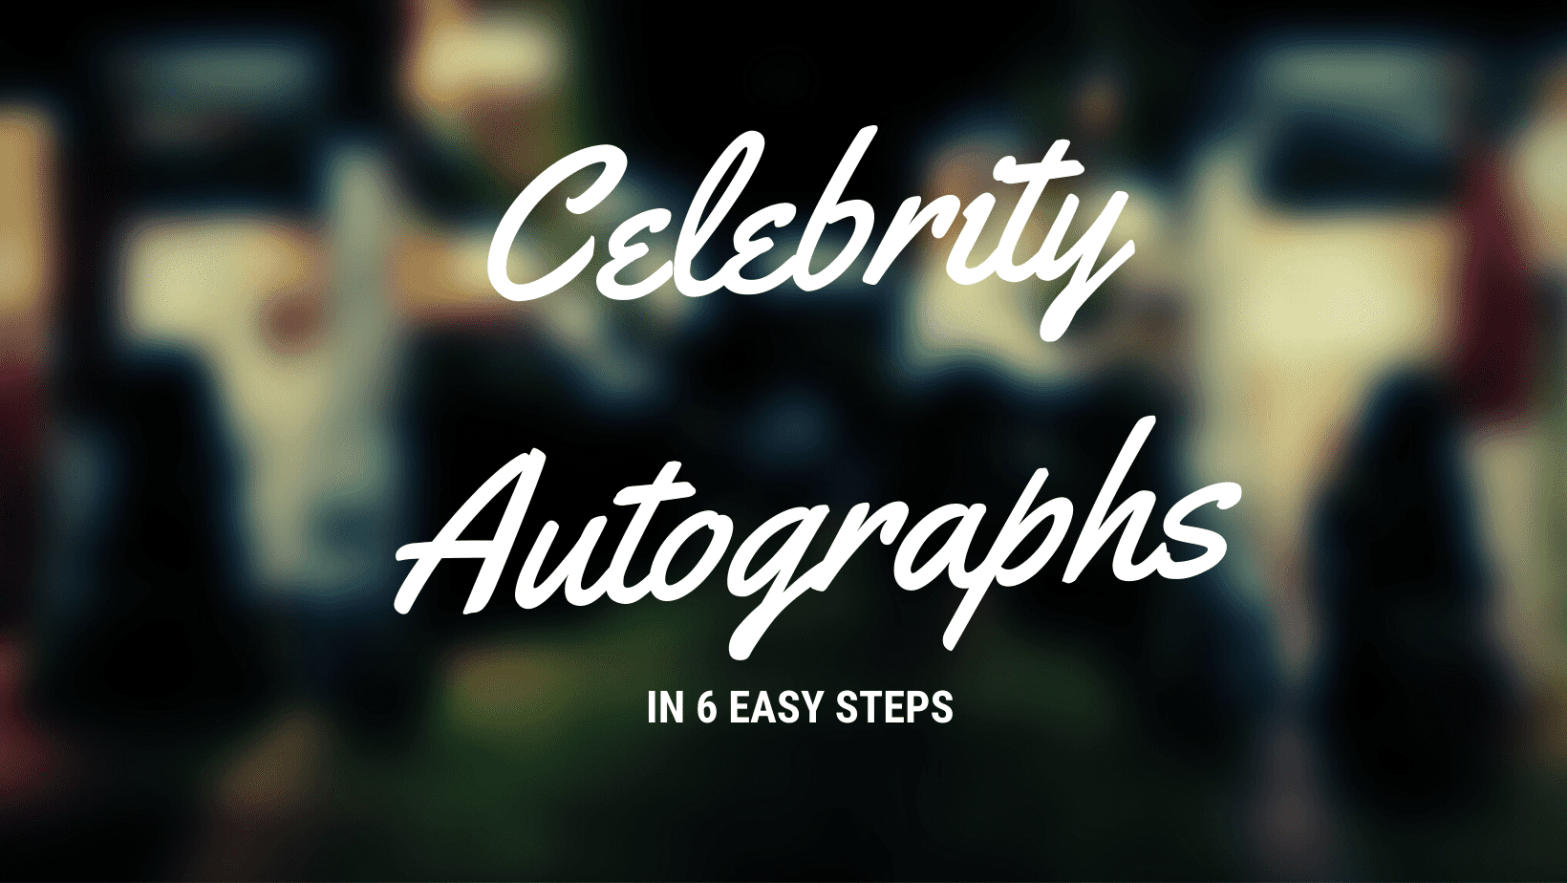 Get Celebrity Autographs Through the Mail in 6 Easy Steps